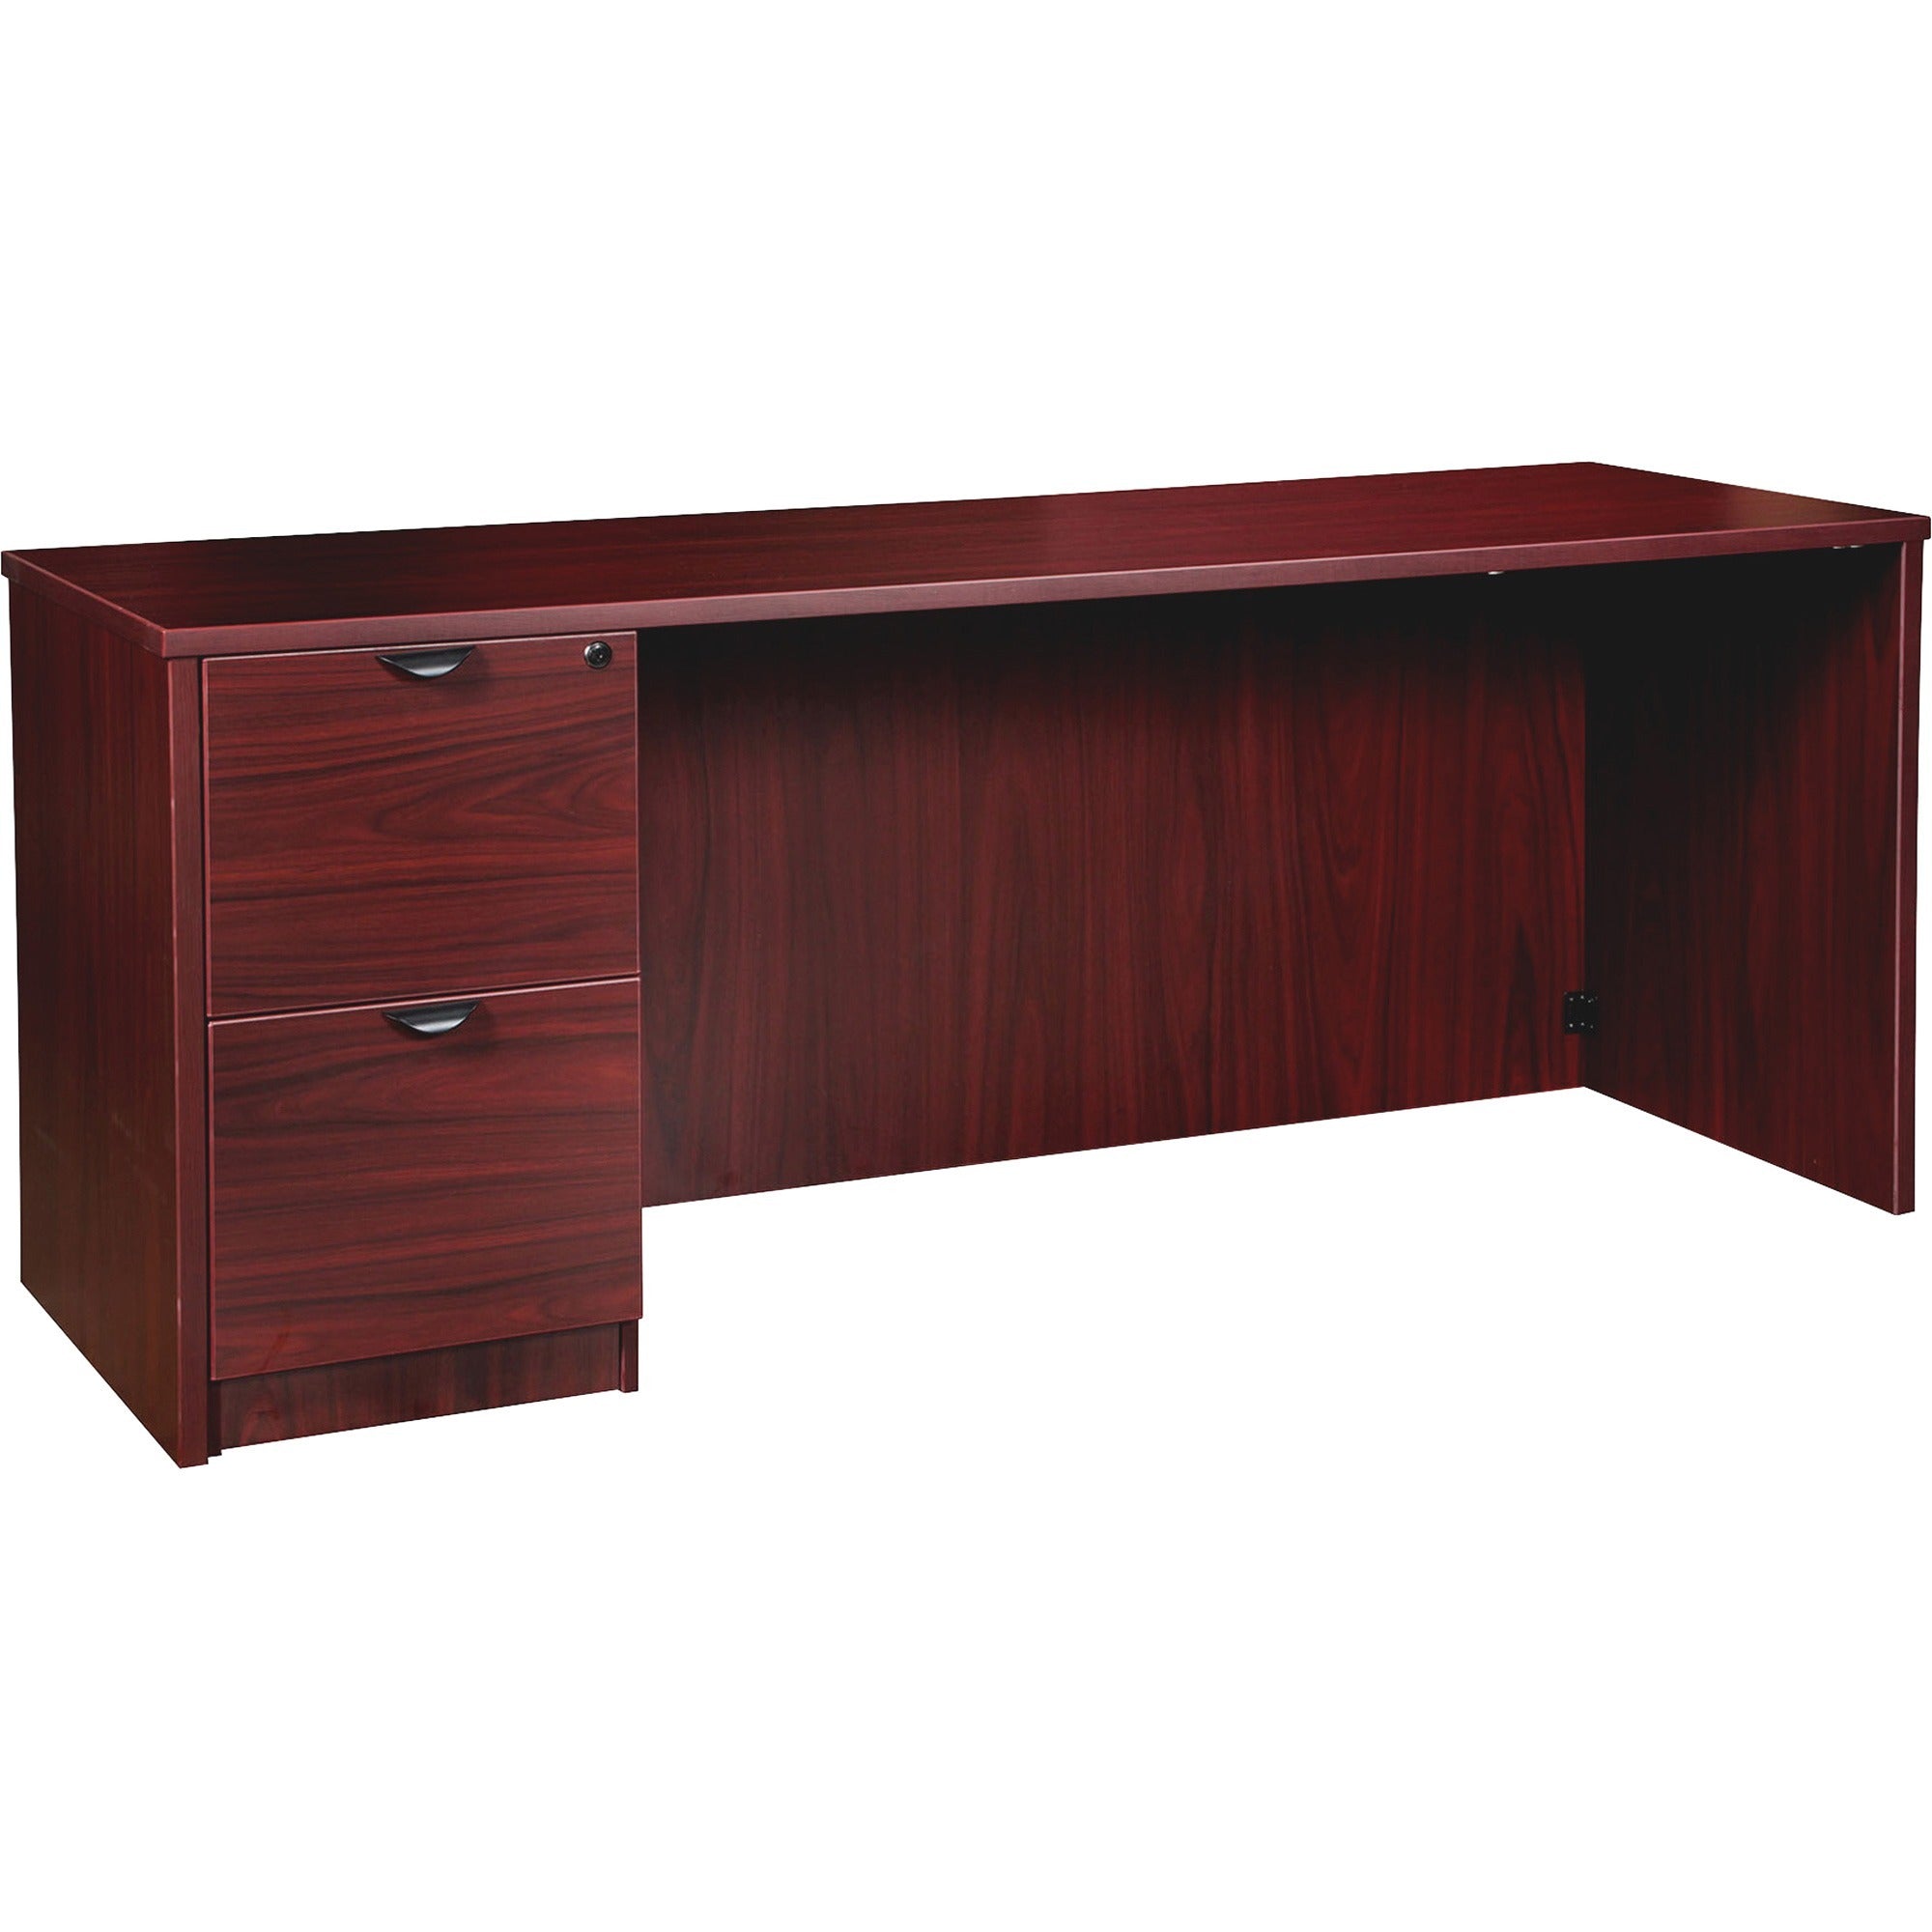 lorell-prominence-20-left-pedestal-credenza-66-x-2429--1-top-2-x-file-drawers-single-pedestal-on-left-side-band-edge-material-particleboard-finish-thermofused-melamine-tfm_llrpc2466lmy - 1